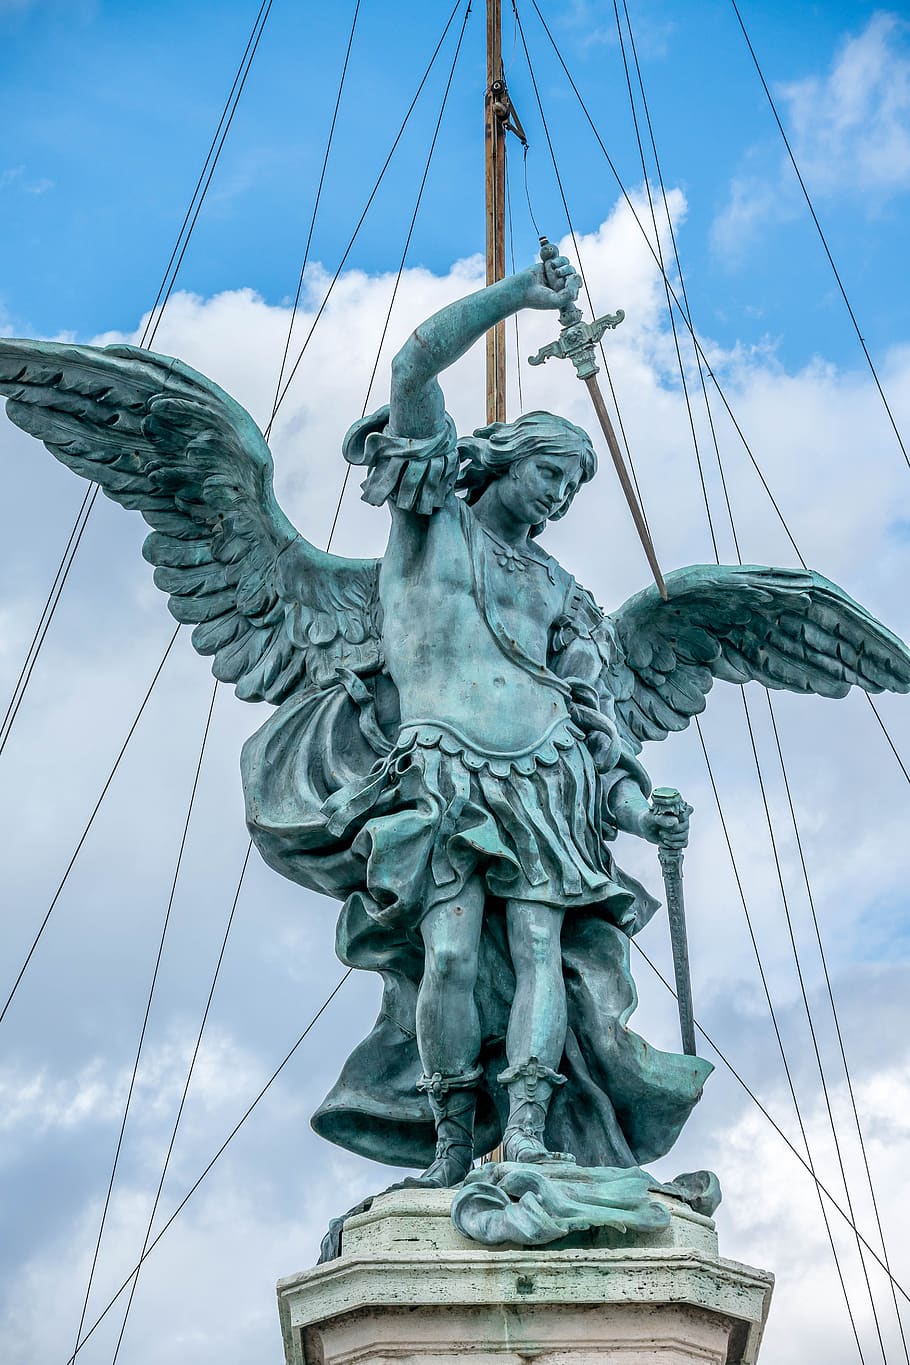 rome, eternity, architecture, city, history, angel, sword, sky, sculpture, art and craft